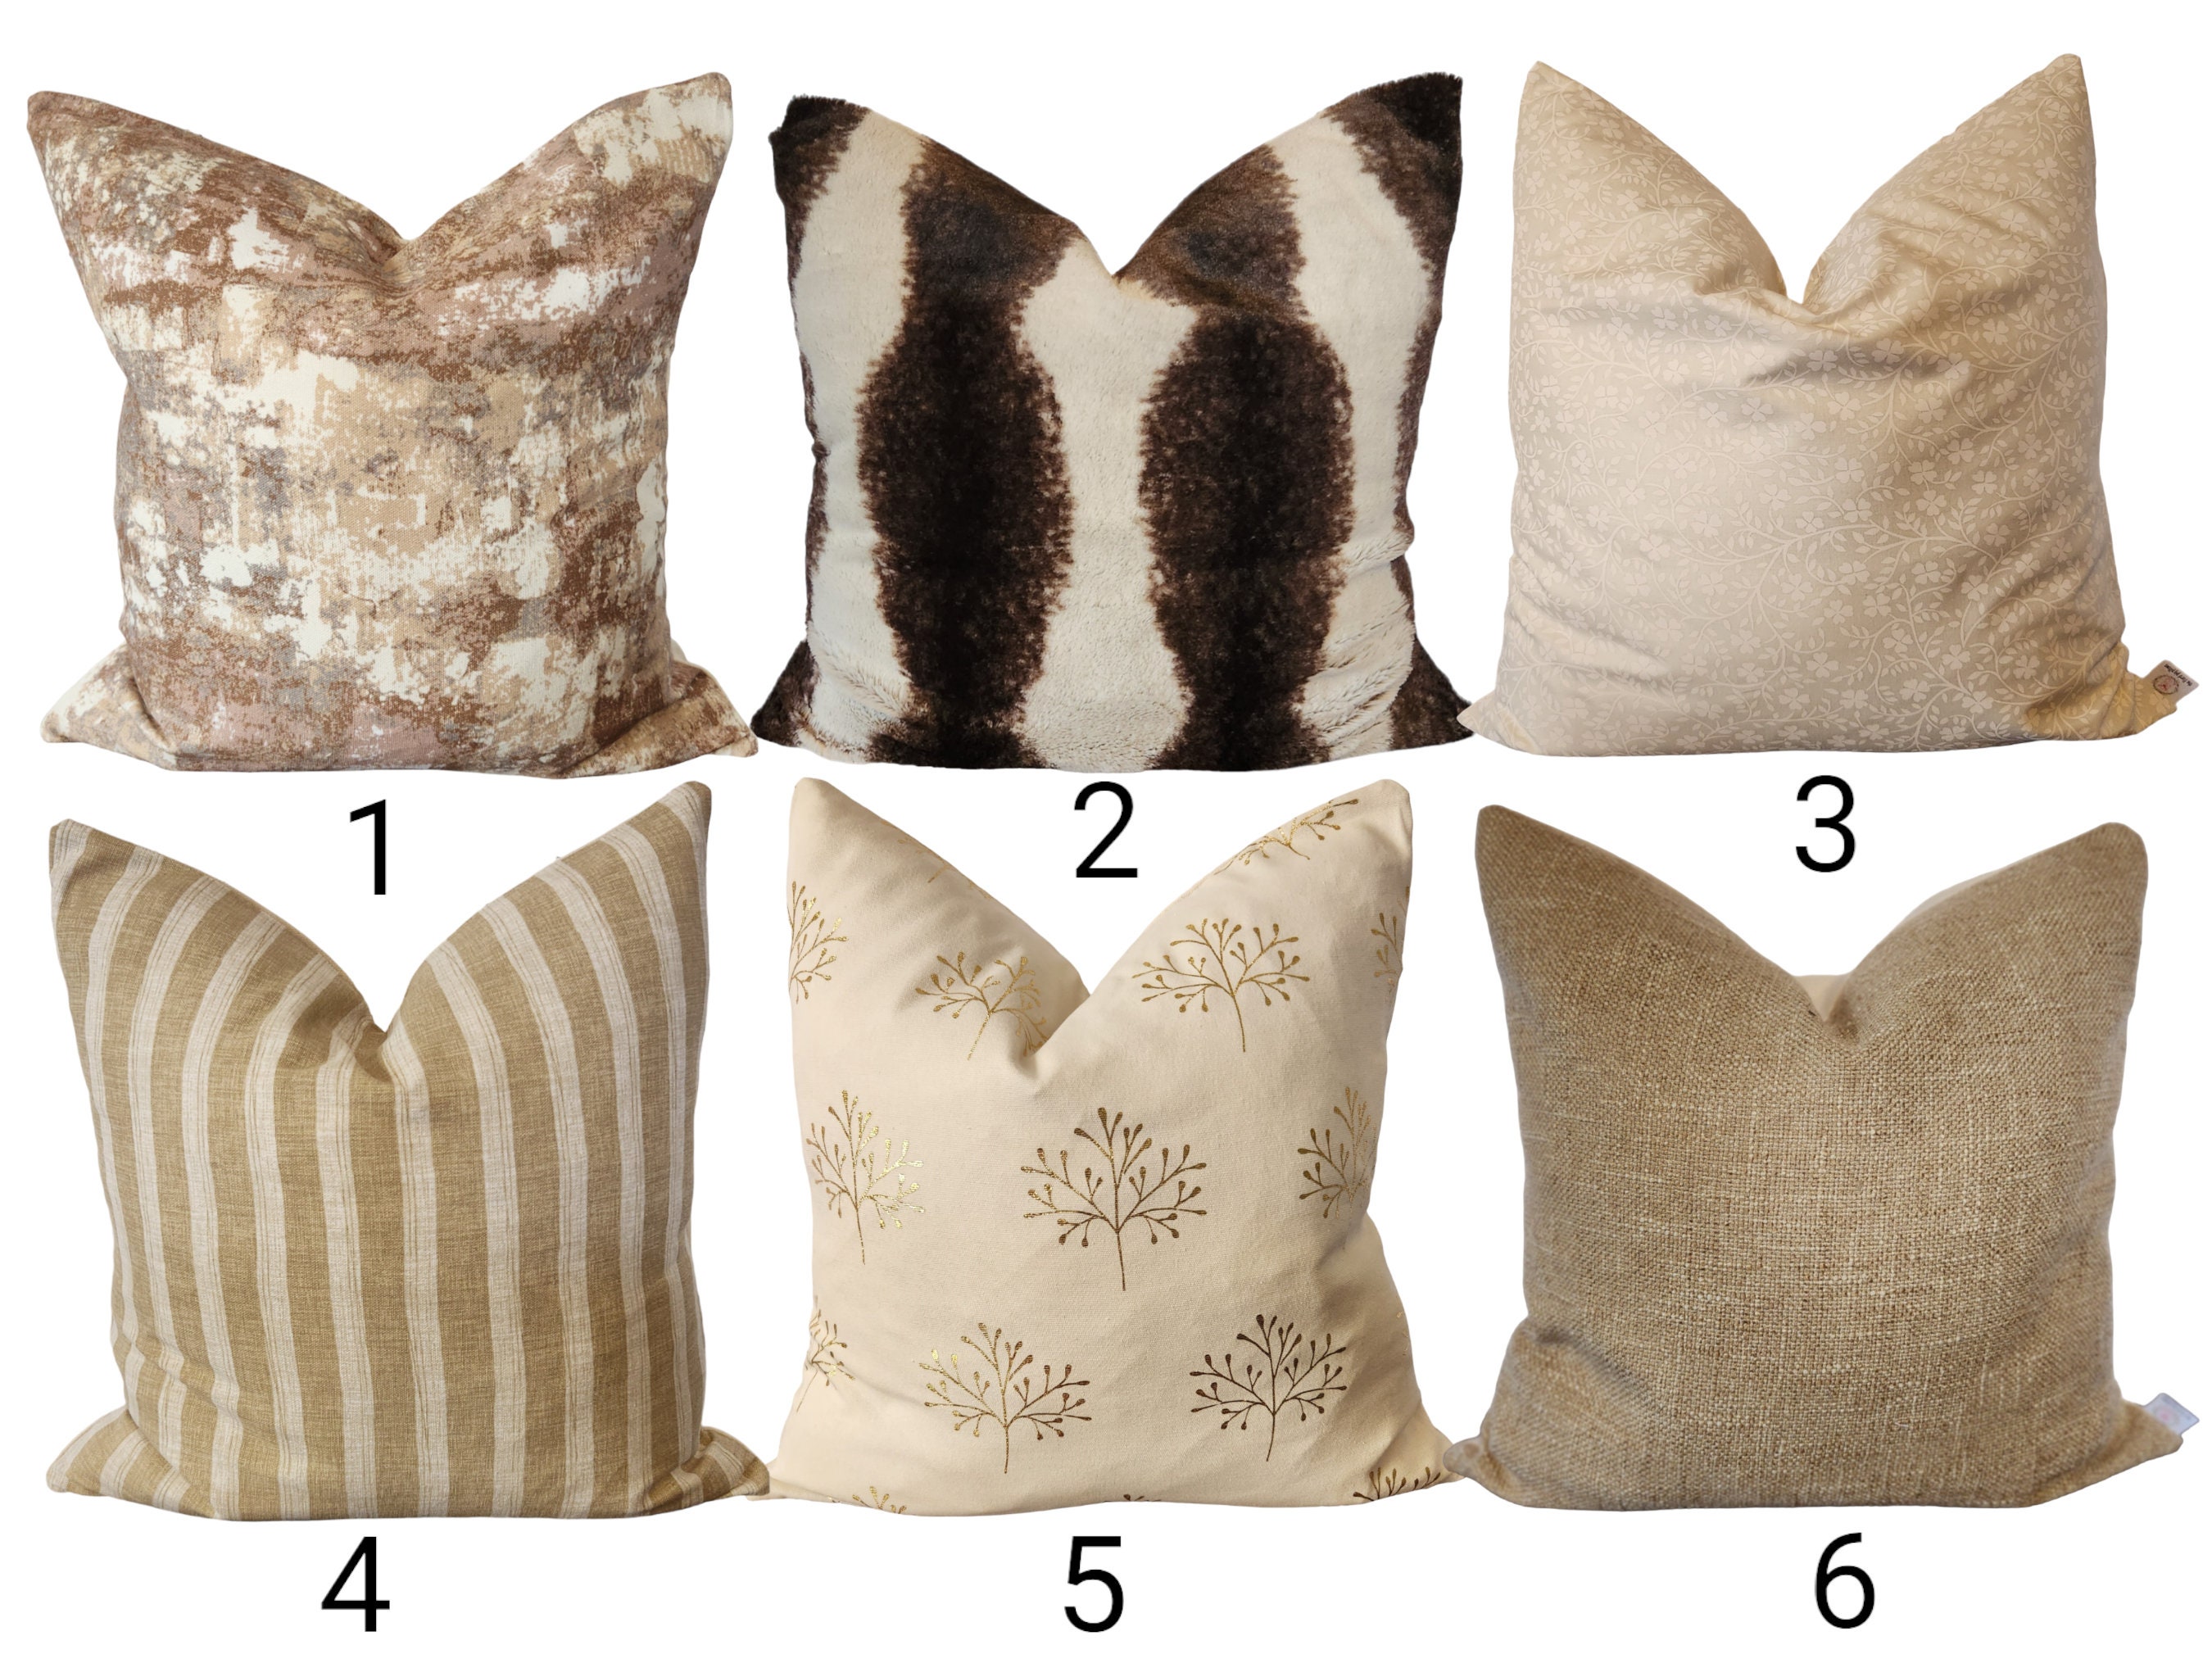 5F Balcony Decorative Boho Throw Pillow Covers 18 × 18 Set of 3 - Neutral Linen Cotton Throw Pillows with Handmade Fringes & Tassels, Cream Beige